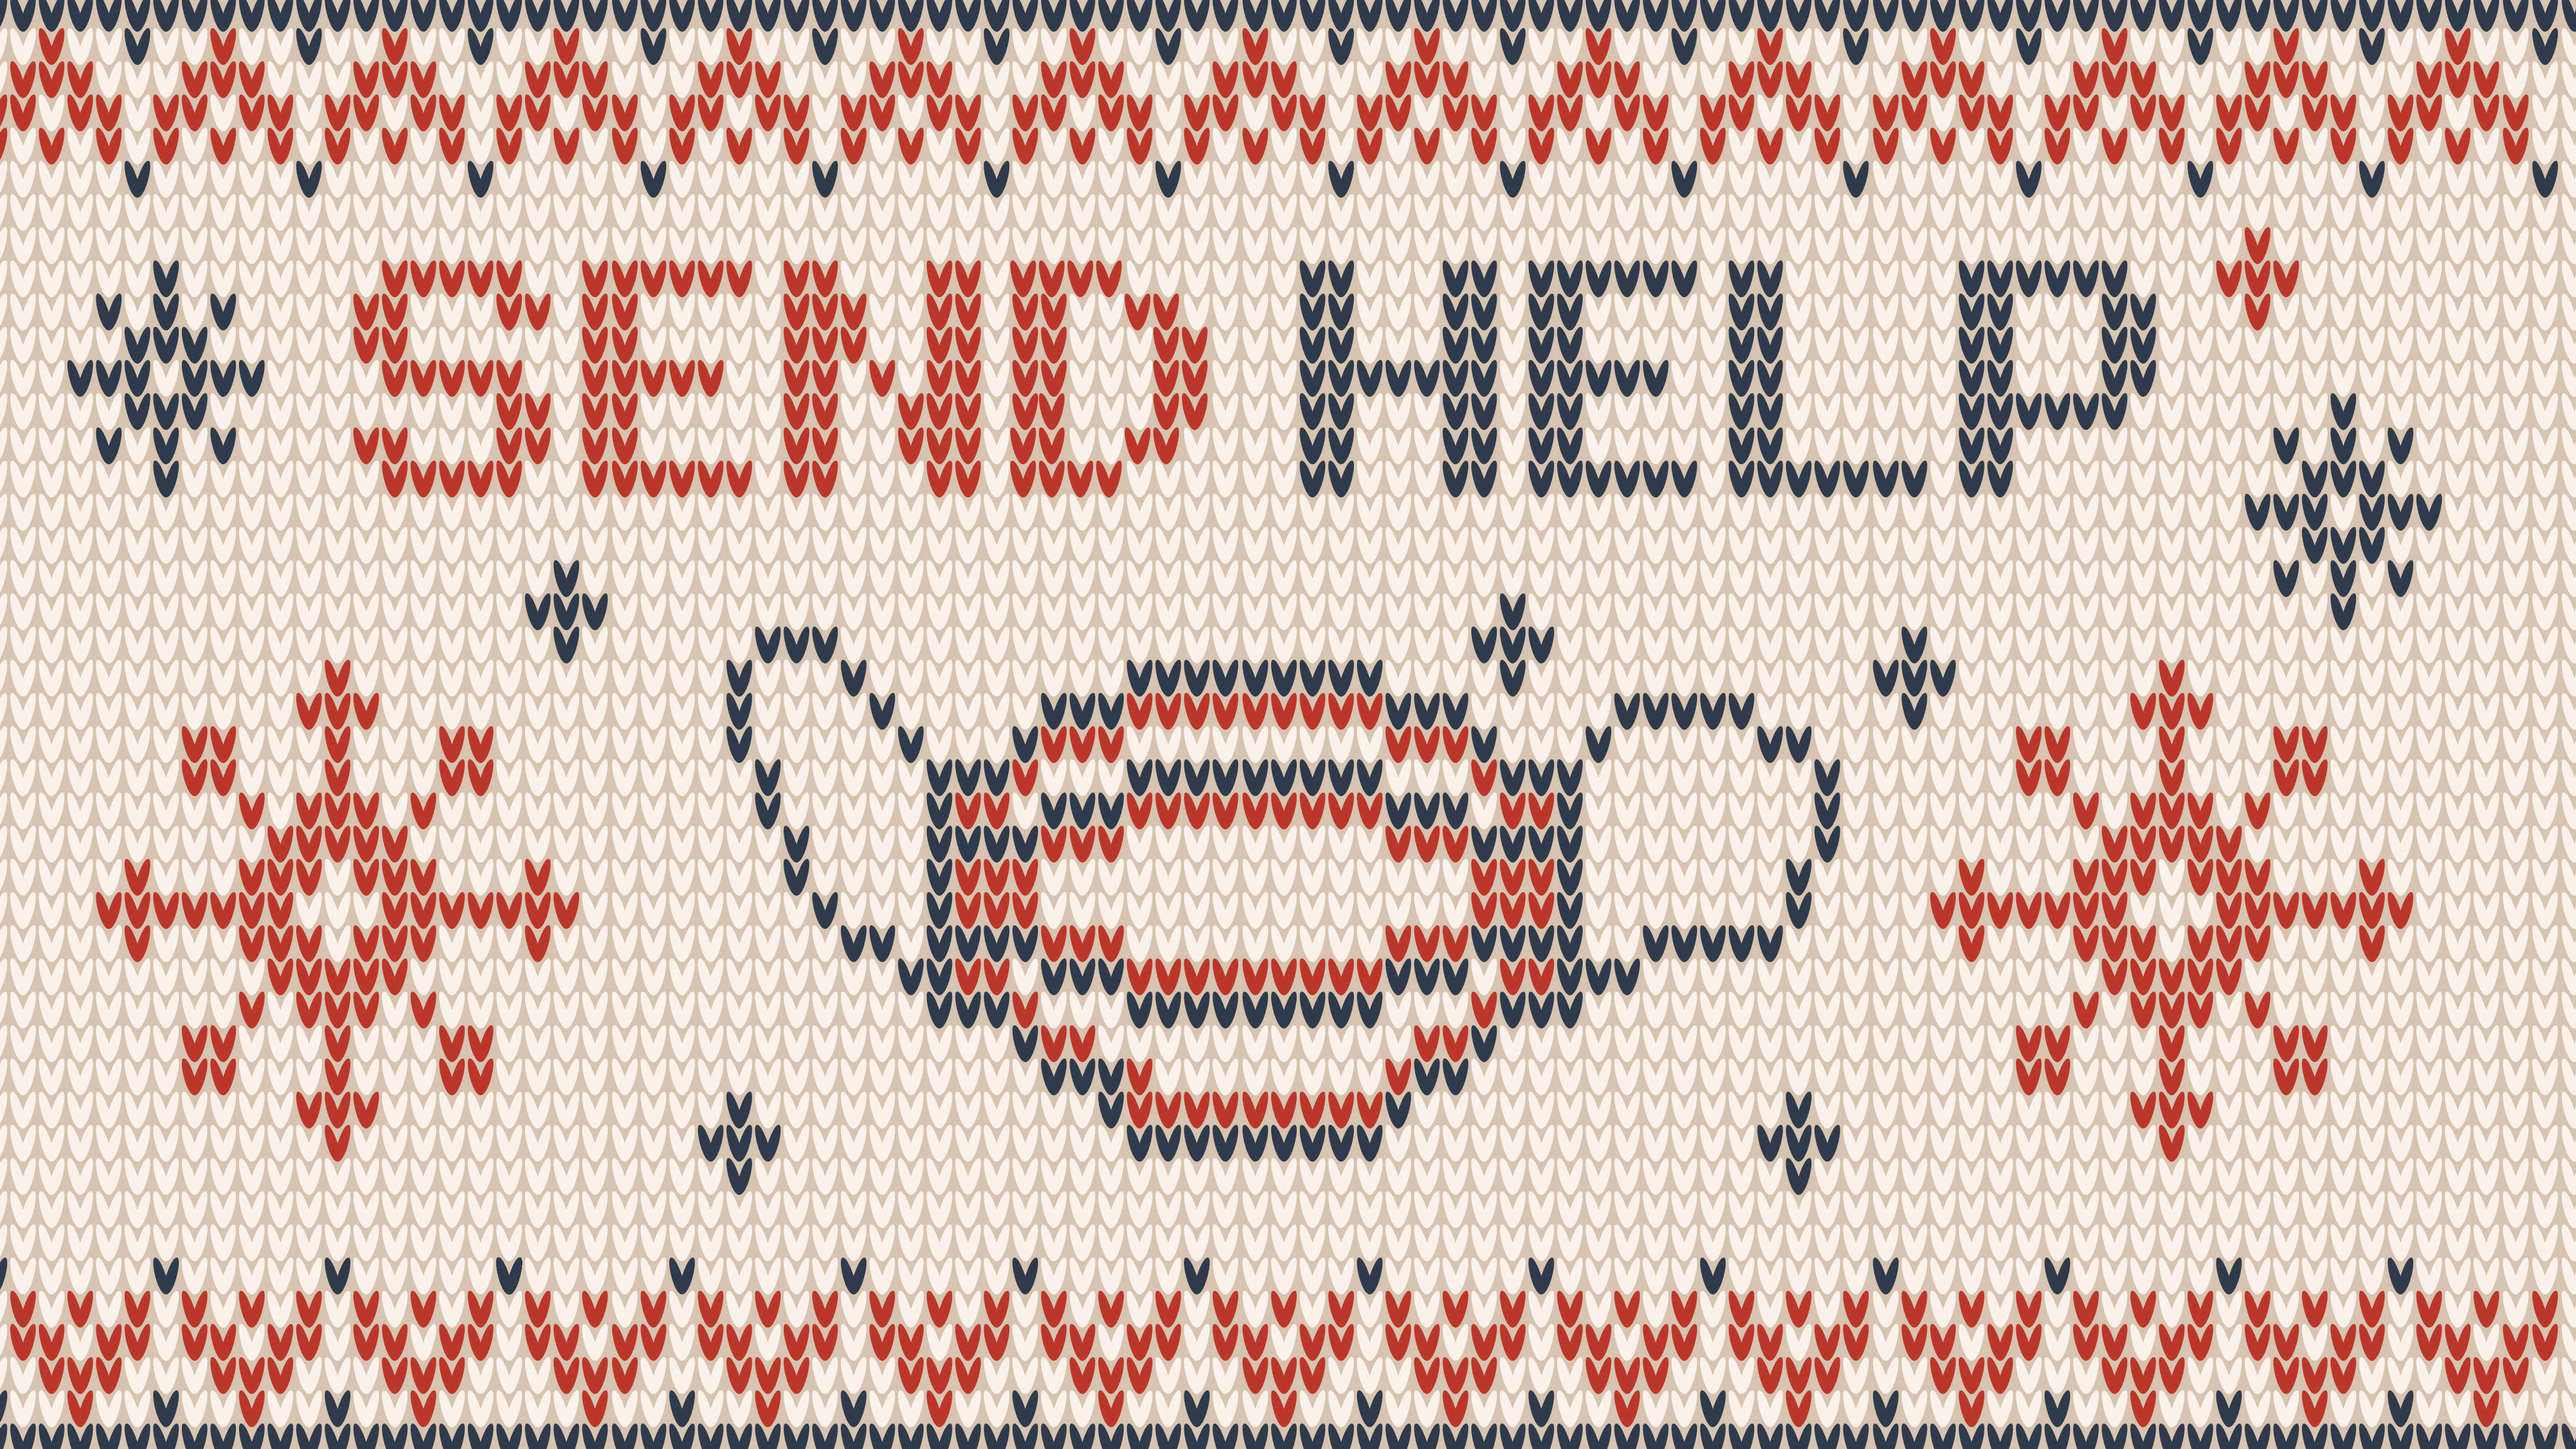 a cross-stitch with a picture of a mask reading “SEND HELP,” flanked by two cross-stitched patterns that might be snowflakes but might be coronavirus